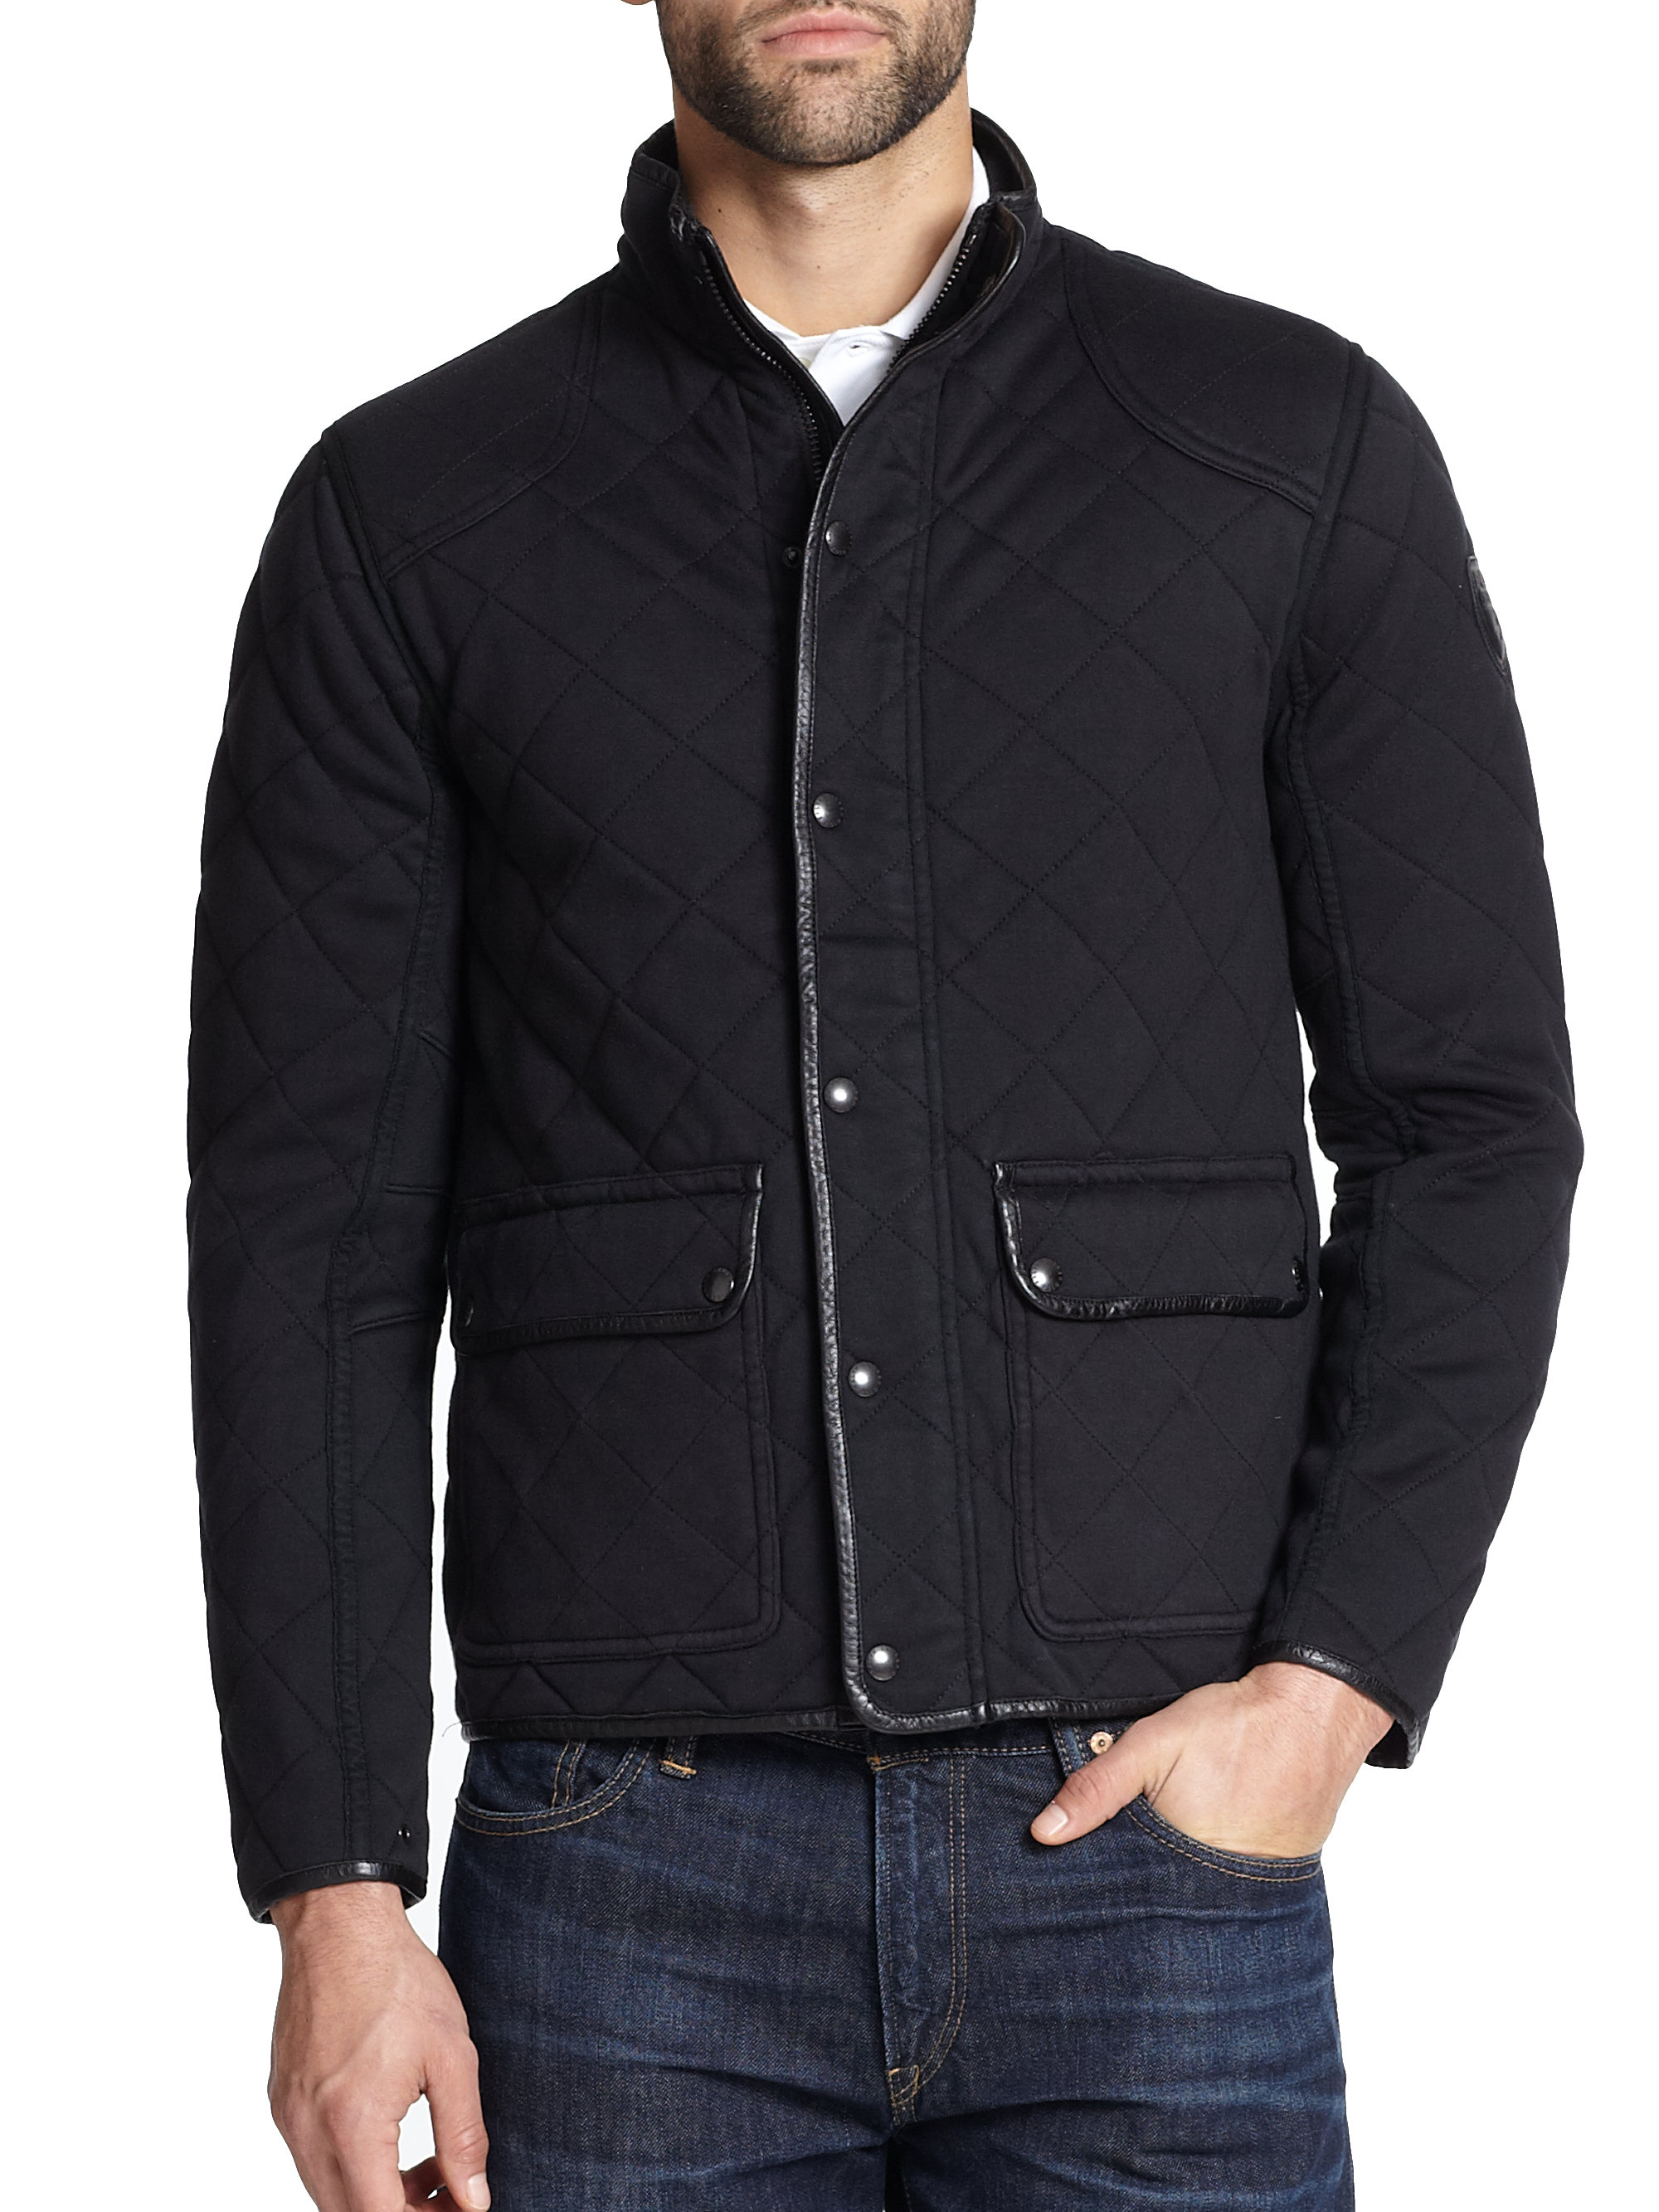 Lyst - Polo Ralph Lauren Quilted Pima Cotton Jacket in Black for Men